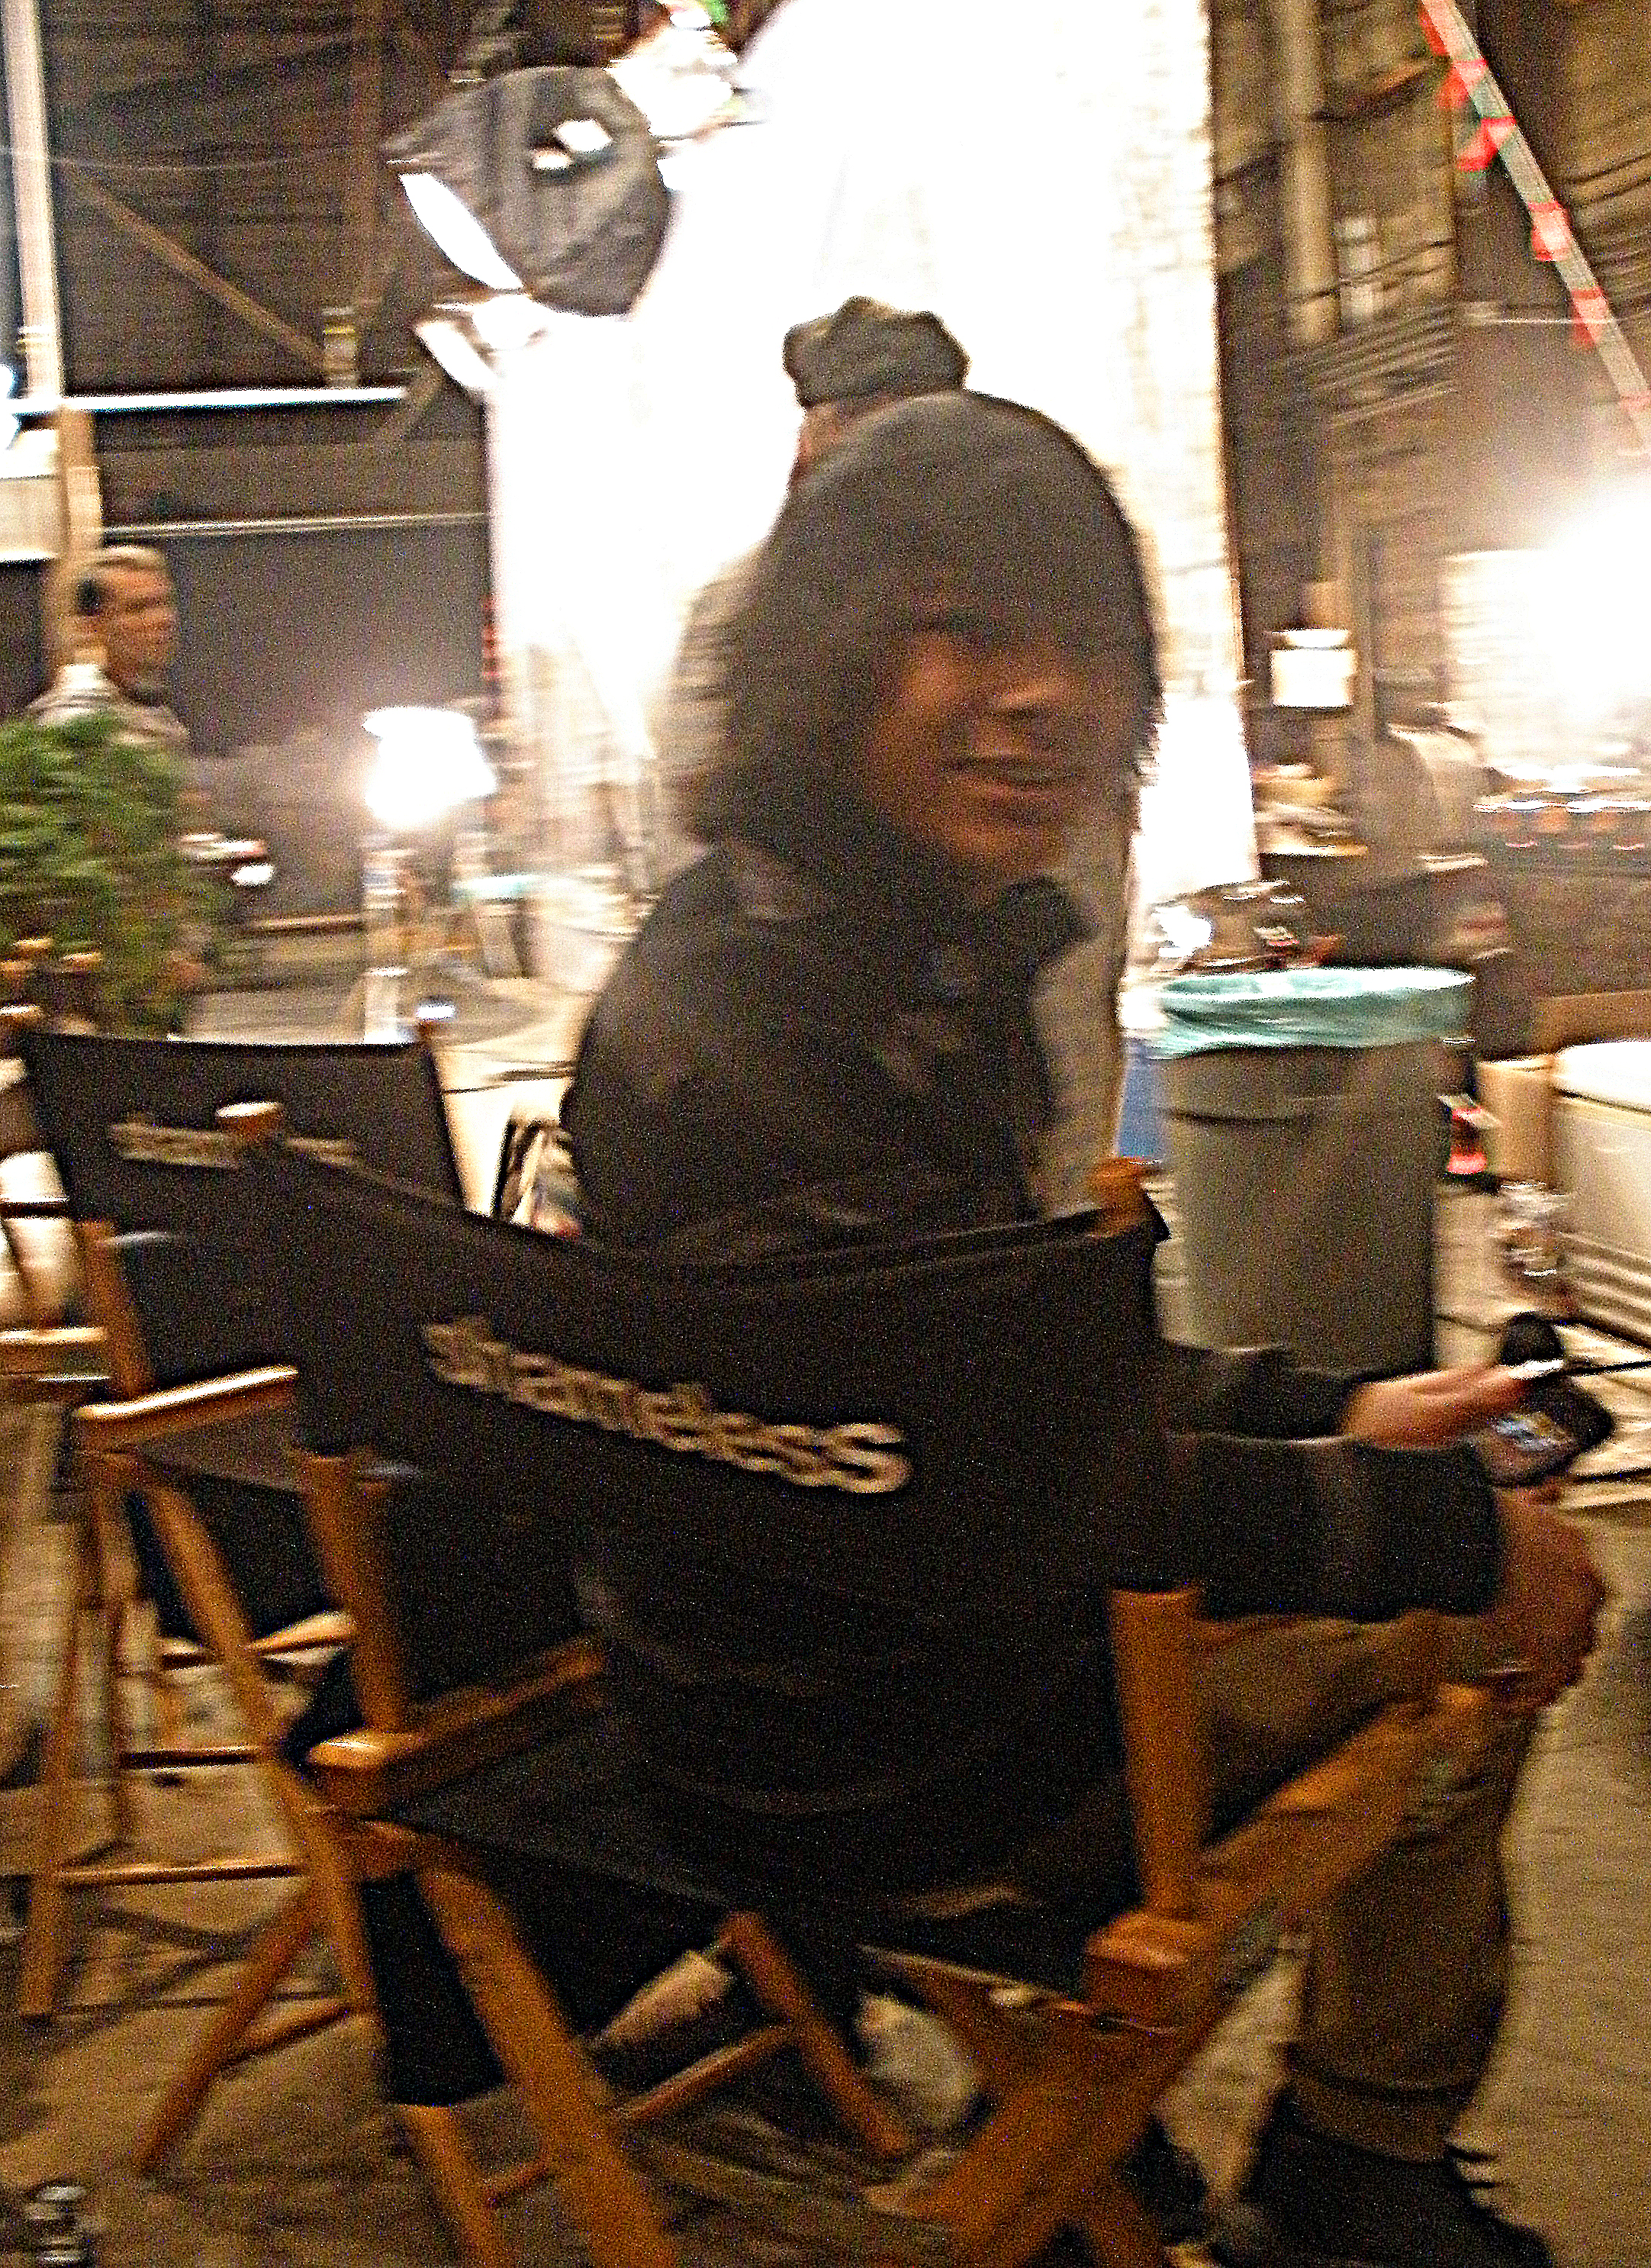 Tai Urban getting ready to be filmed on the set of Showtime's Shameless (Season 4)